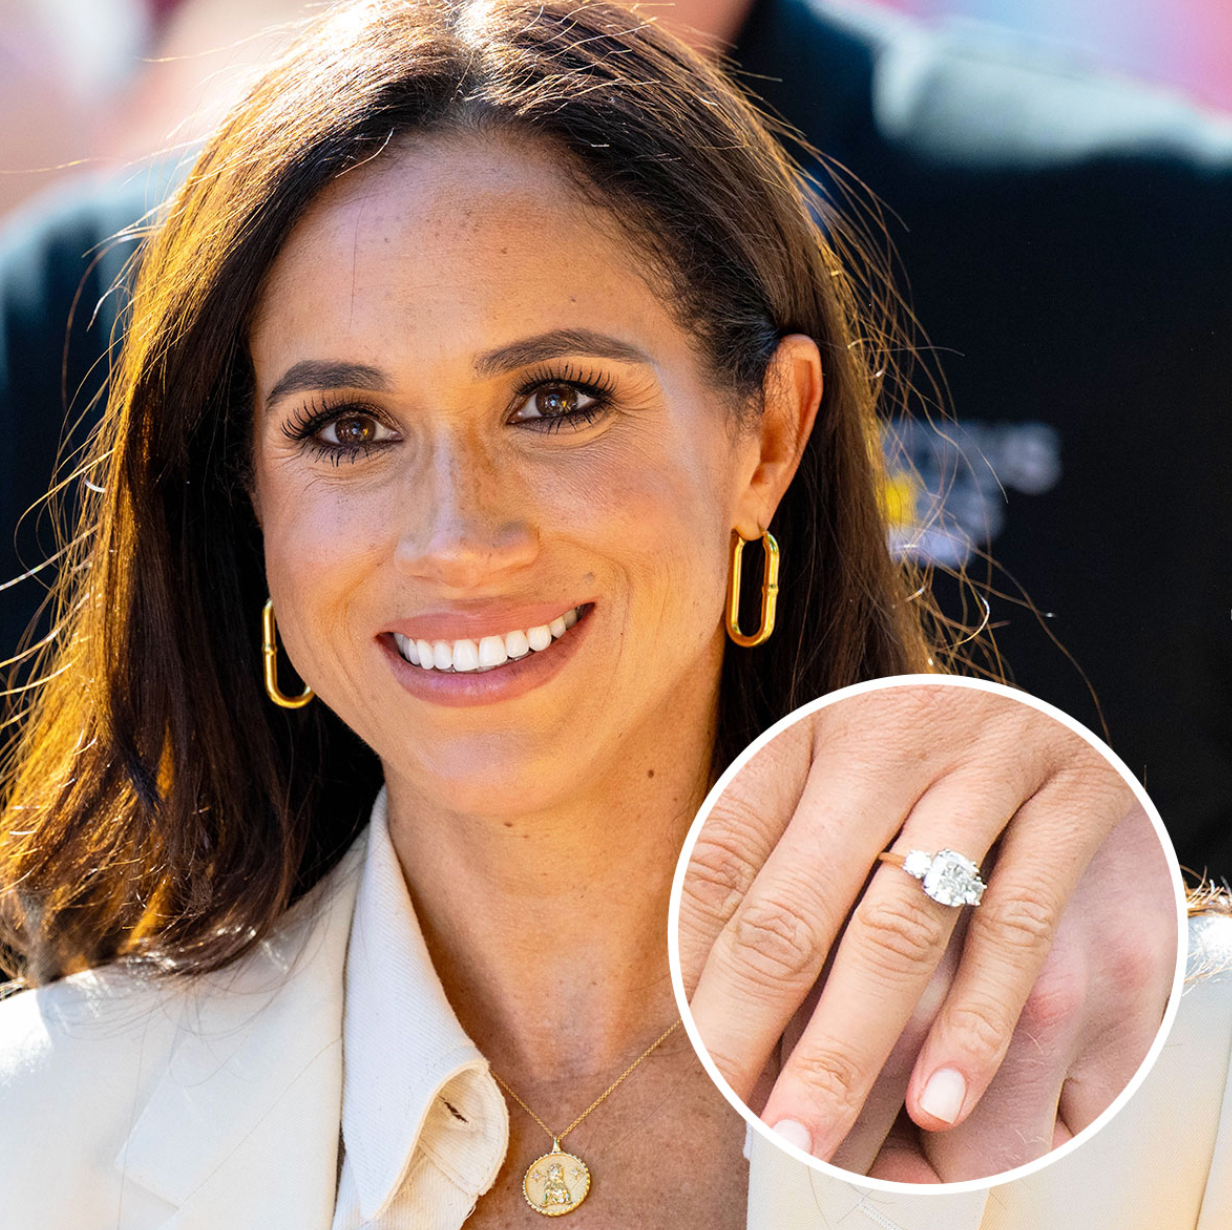 Meghan Markle engagement ring is the most searched